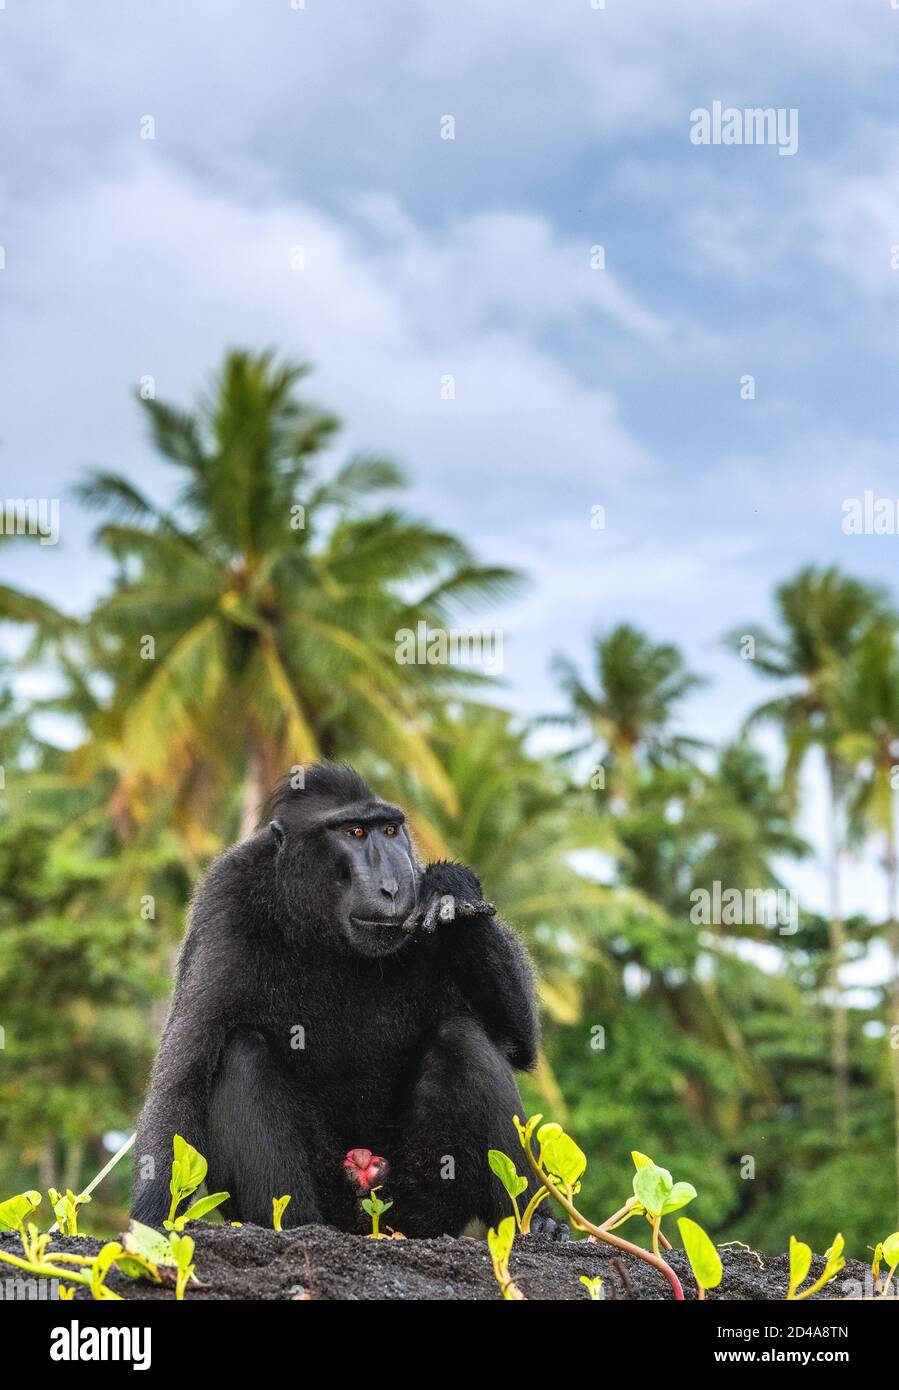 The Celebes crested macaque.  Crested black macaque, Sulawesi crested macaque, celebes macaque or the black ape. Wild nature. Natural habitat. Sulawes Stock Photo